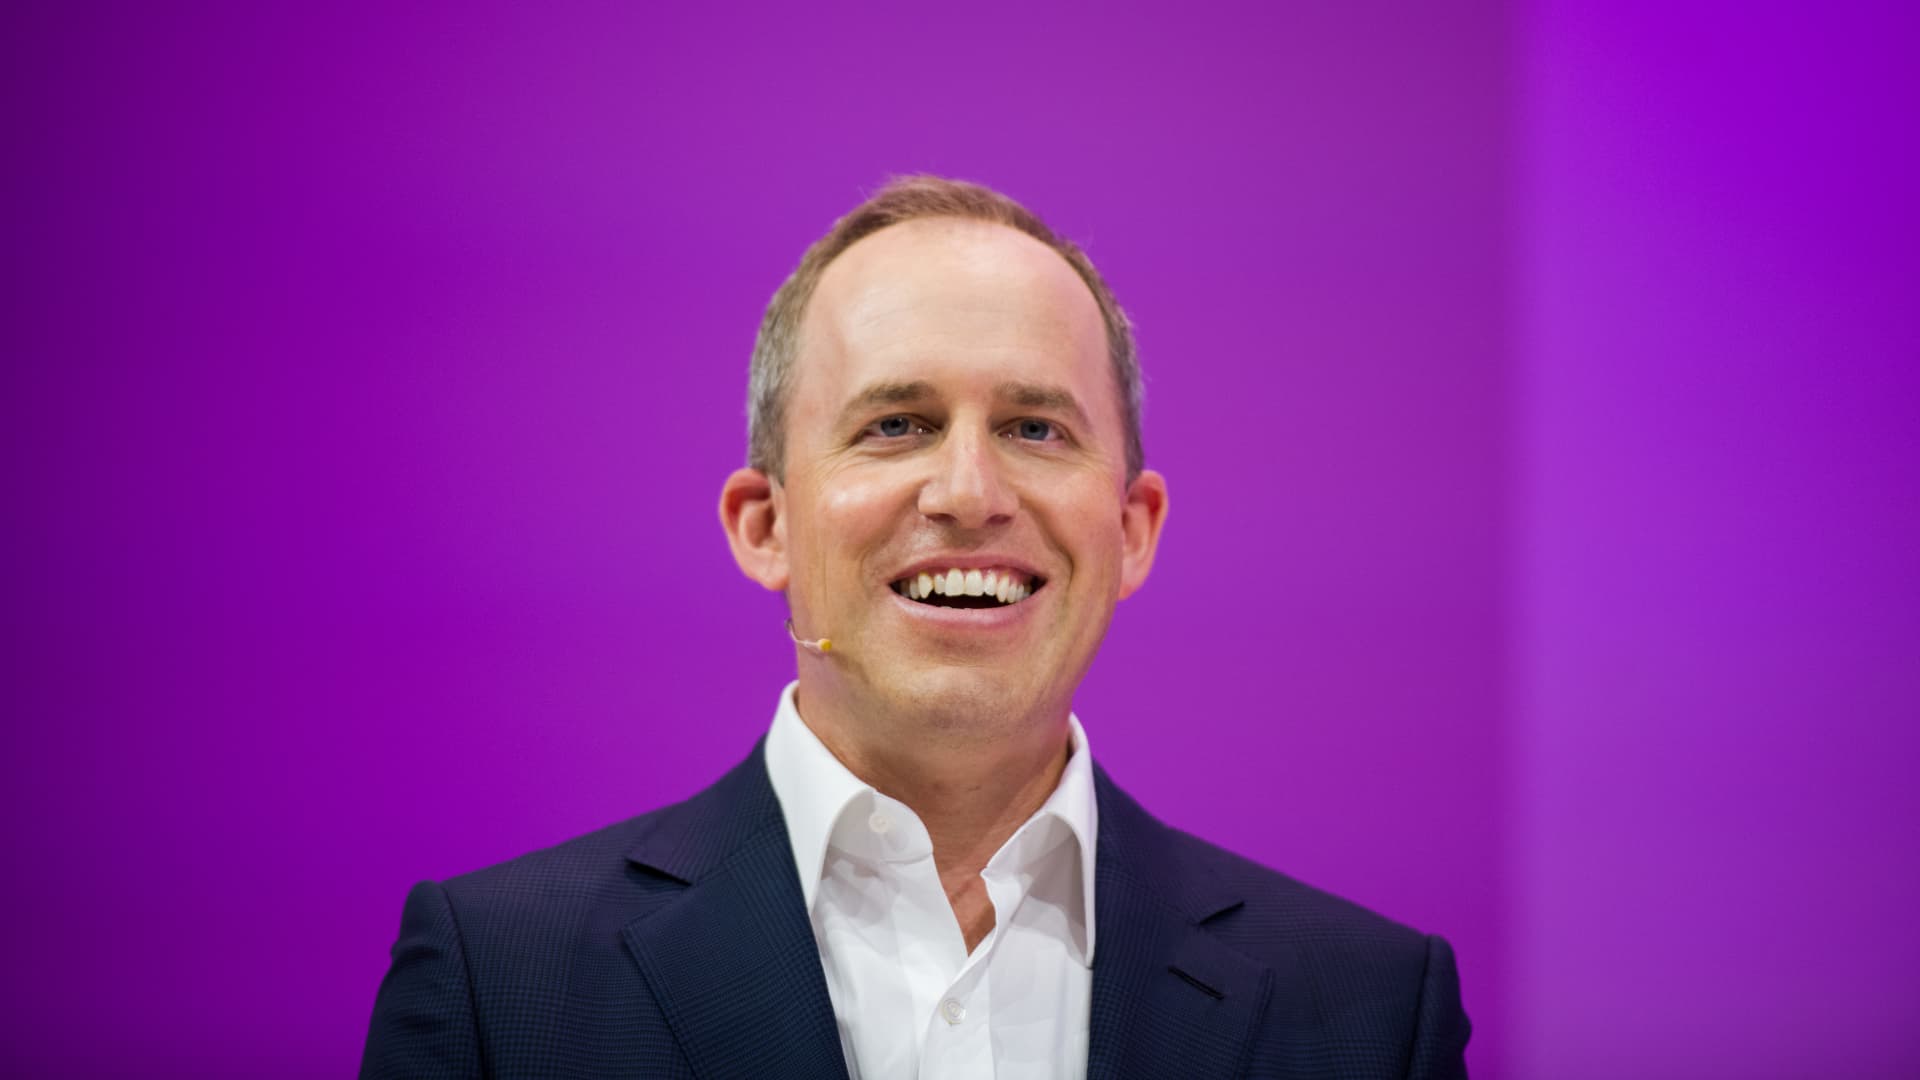 Here's Bret Taylor's first big technical move at Salesforce as co-CEO